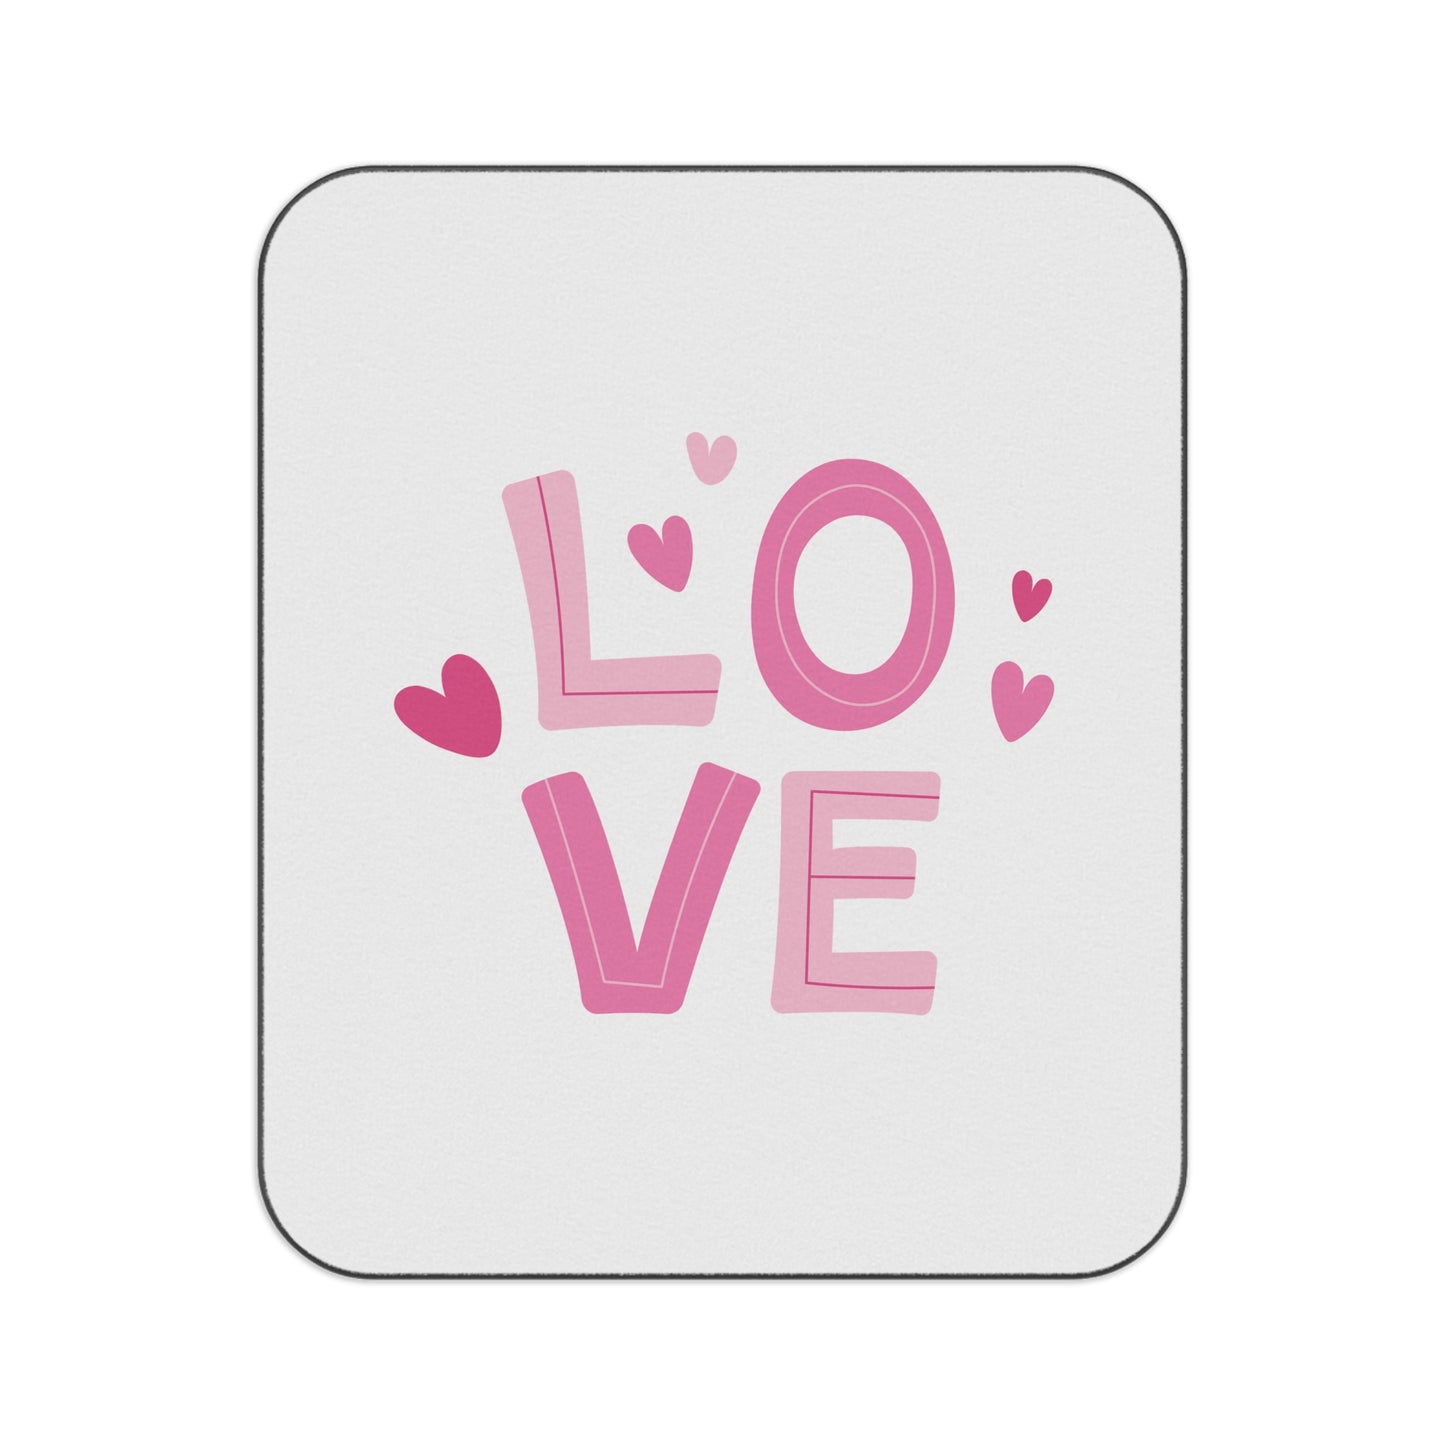 Love with Flying Heart Printed Picnic Valentine Blanket, Pink